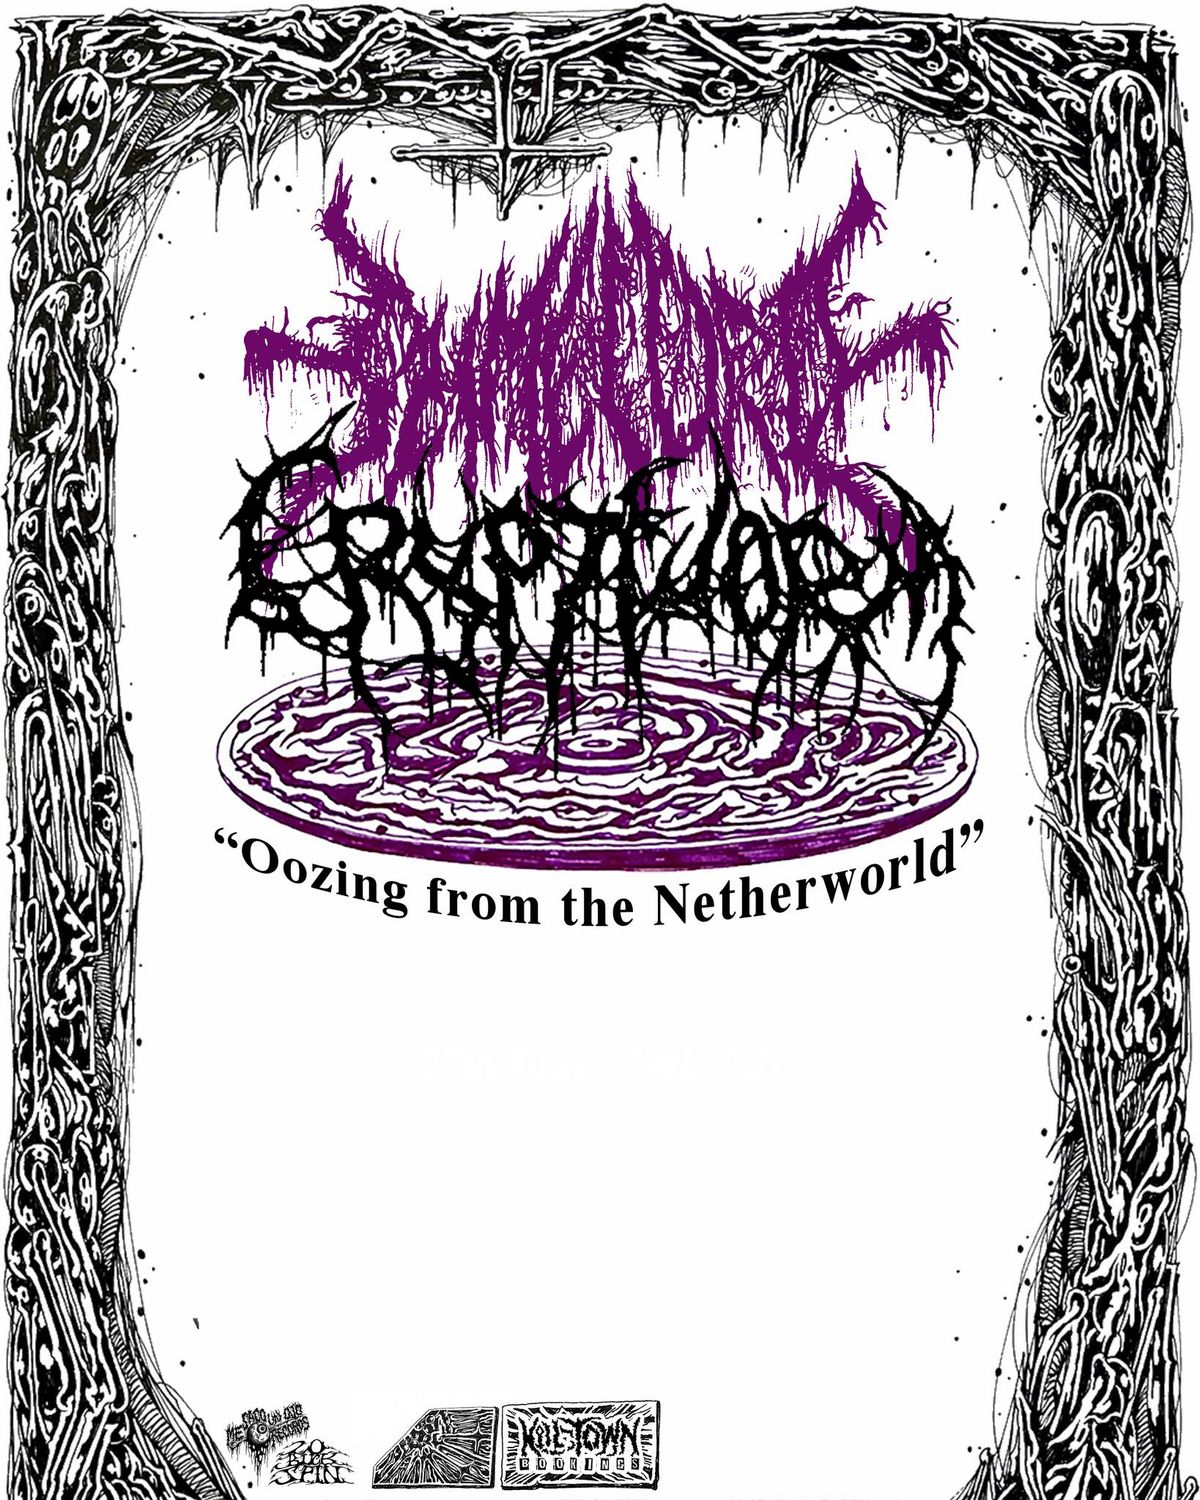 Slimelord (uk) + Cryptworm (uk) + support